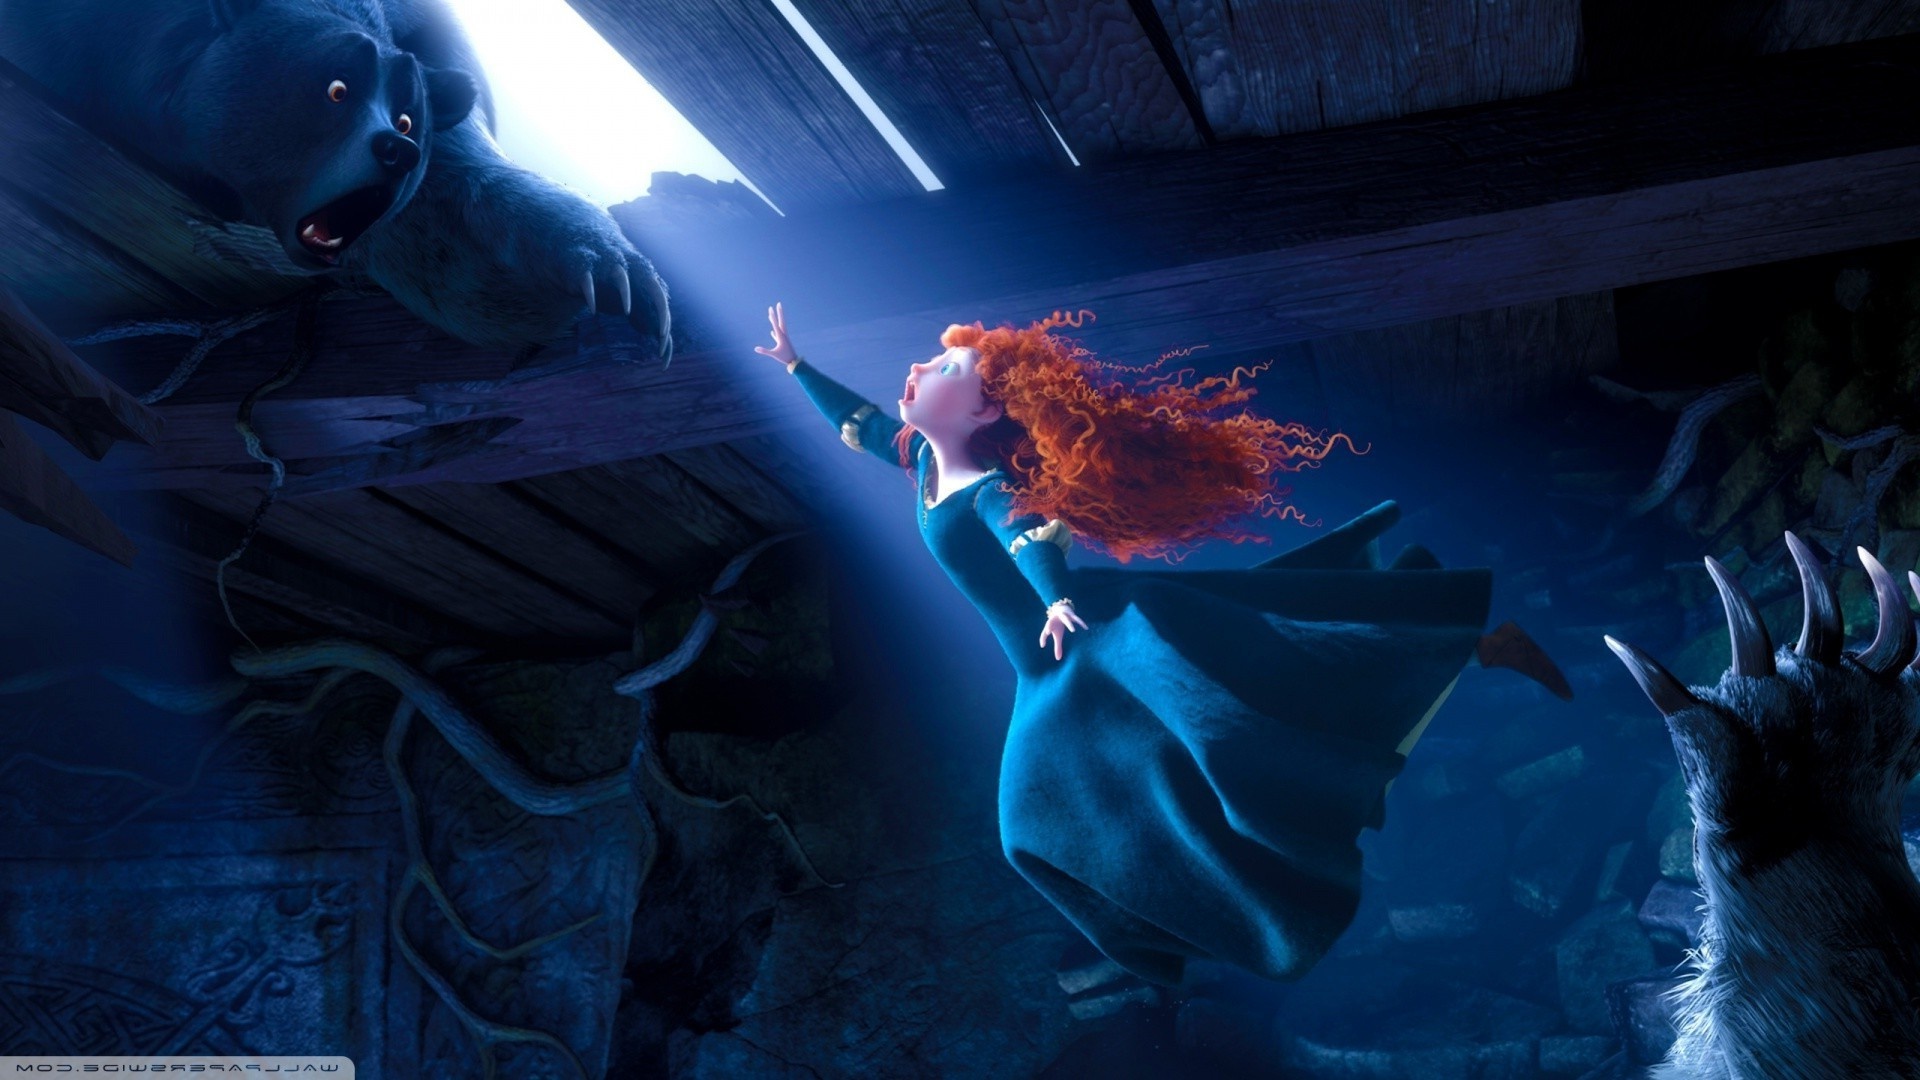 Brave (Disney): The story of a skilled archer named Merida who defies an age-old custom, causing chaos in her kingdom. 1920x1080 Full HD Wallpaper.